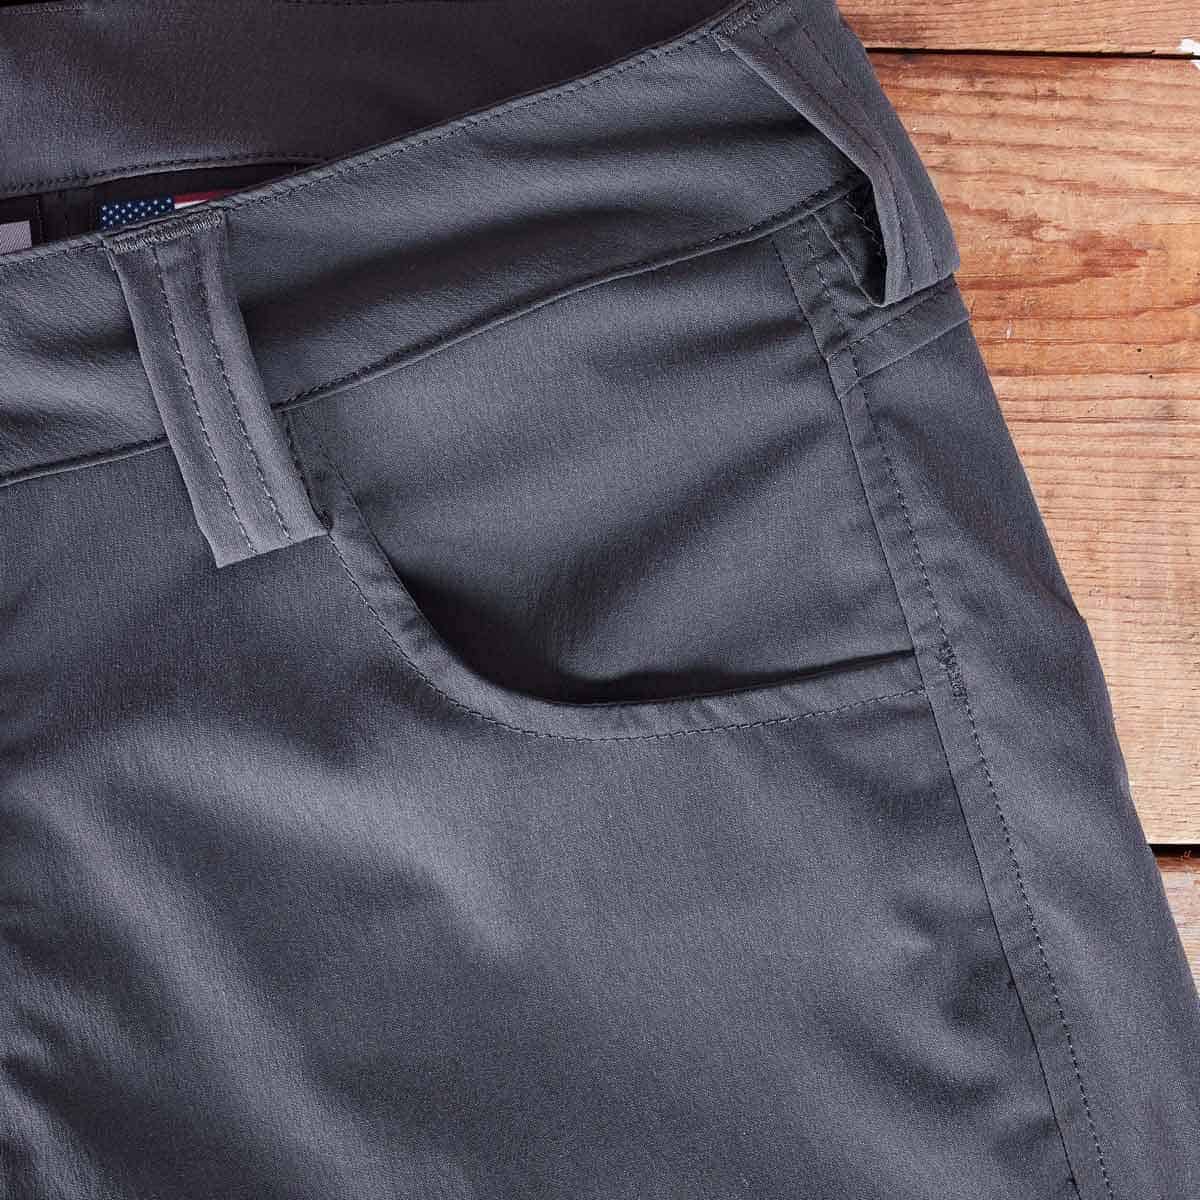 GORUCK Women's Simple Pants - Pants for Rucking and Workouts - Fit at